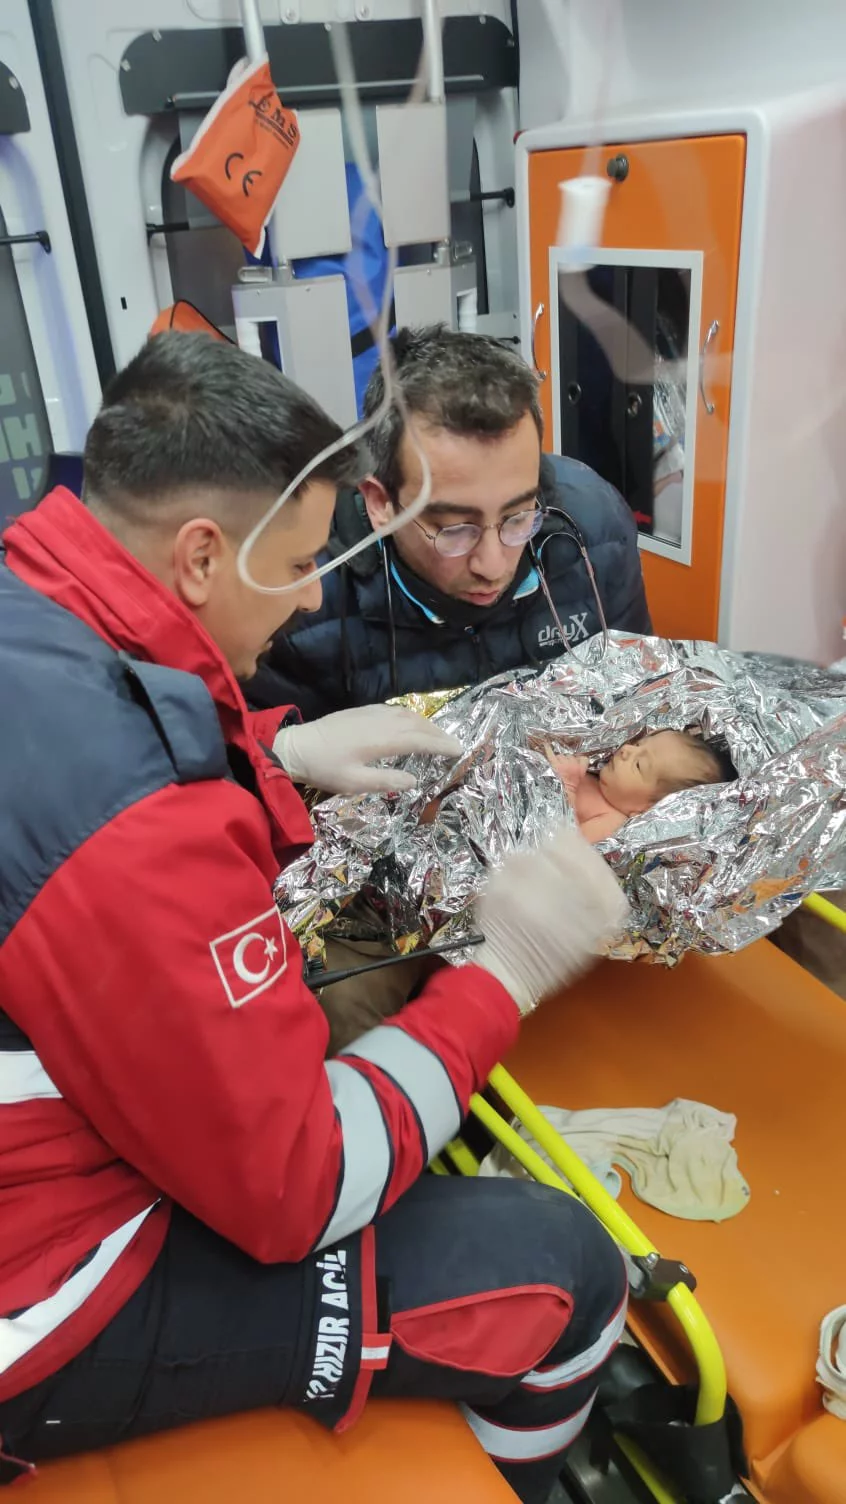 10-day-old baby, mother rescued after 4 days under rubble in Turkey earthquake